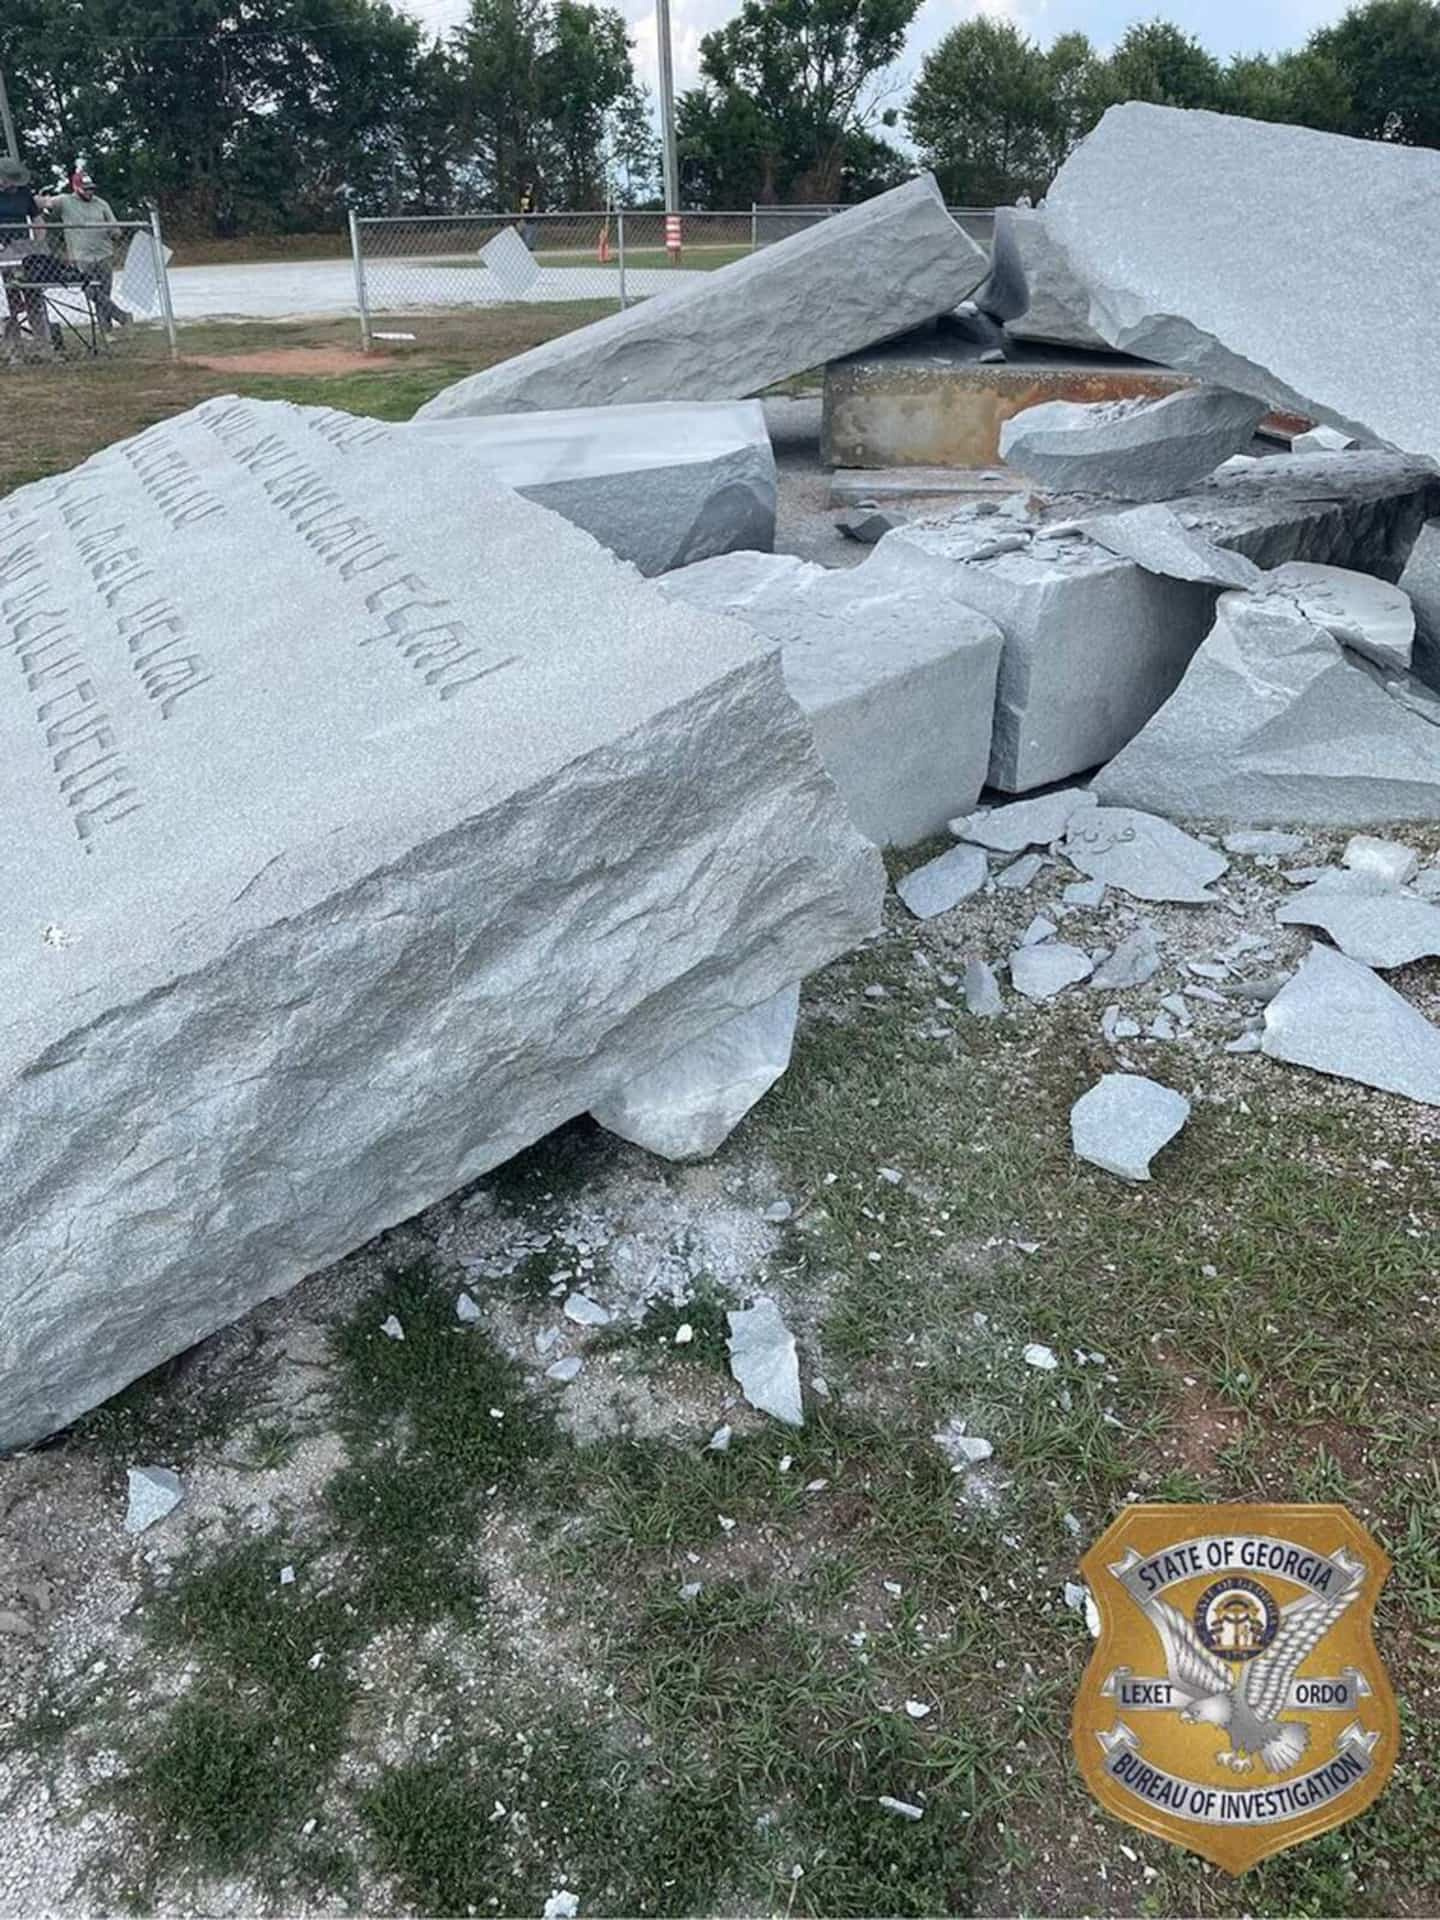 A mysterious granite monument destroyed in the middle of the night in the southern United States